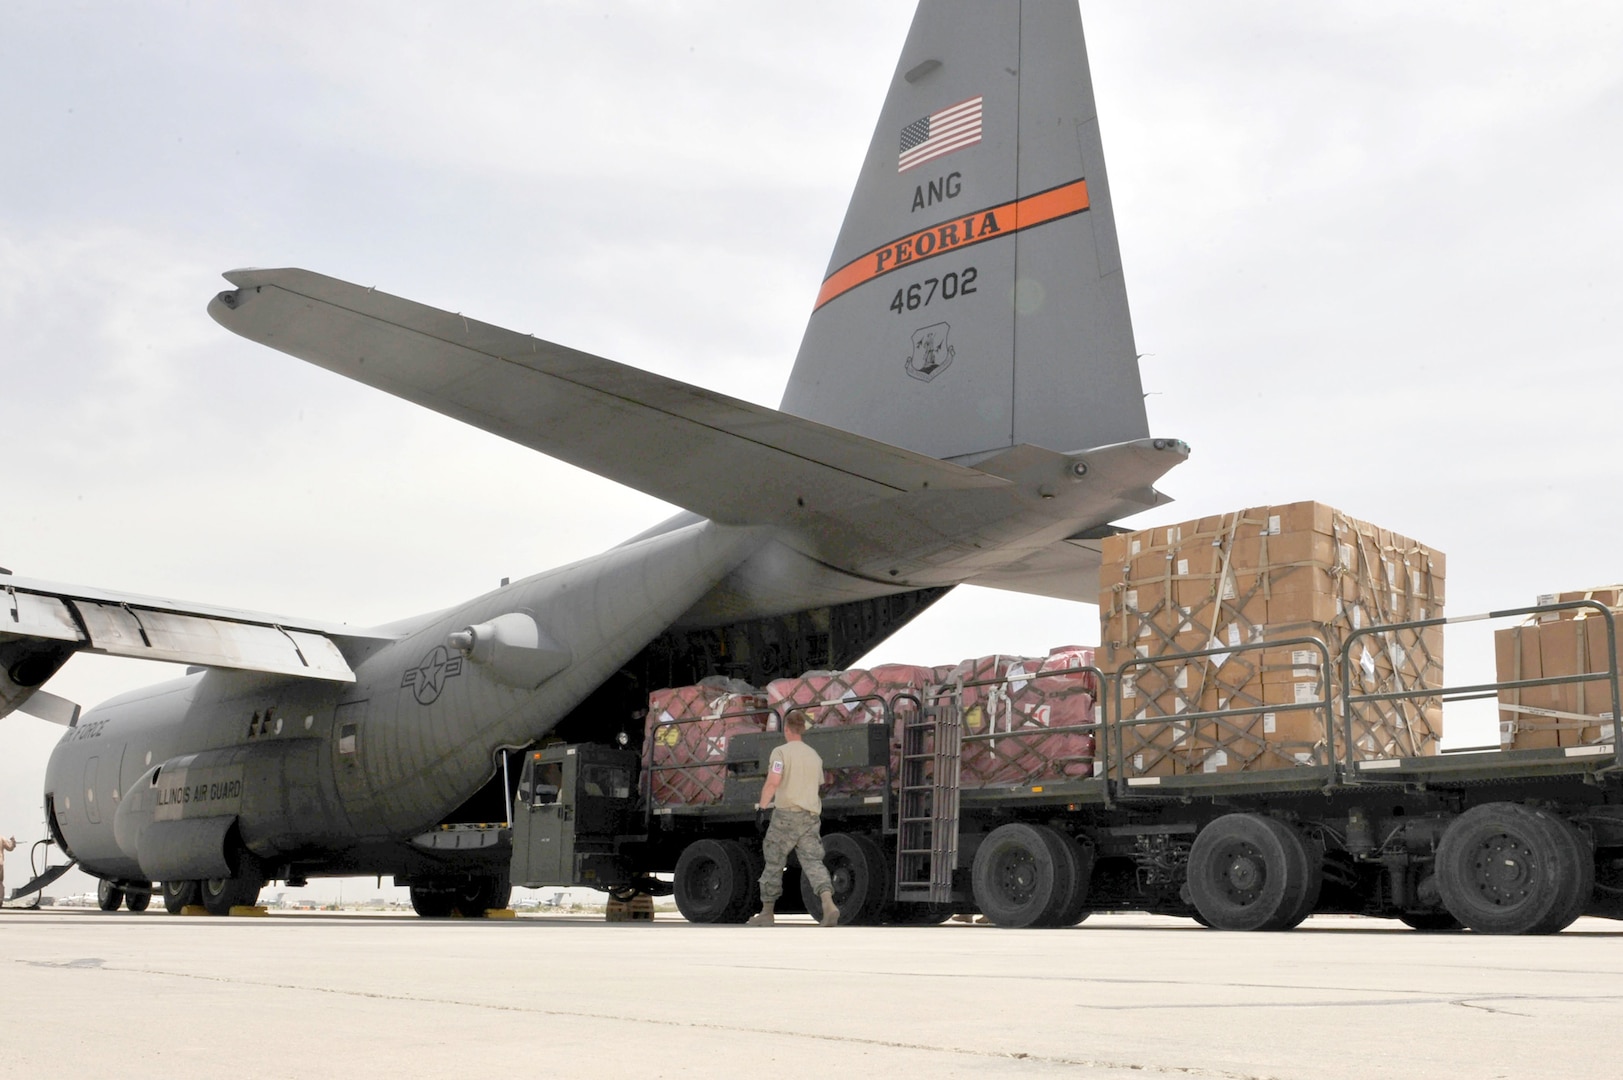 A C-130 Hercules from the Illinois Air National Guard is loaded with medical supplies, hygiene kits and water in support of flood relief efforts for the people of Tajikistan at Bagram Airfield, Afghanistan May 21, 2010.